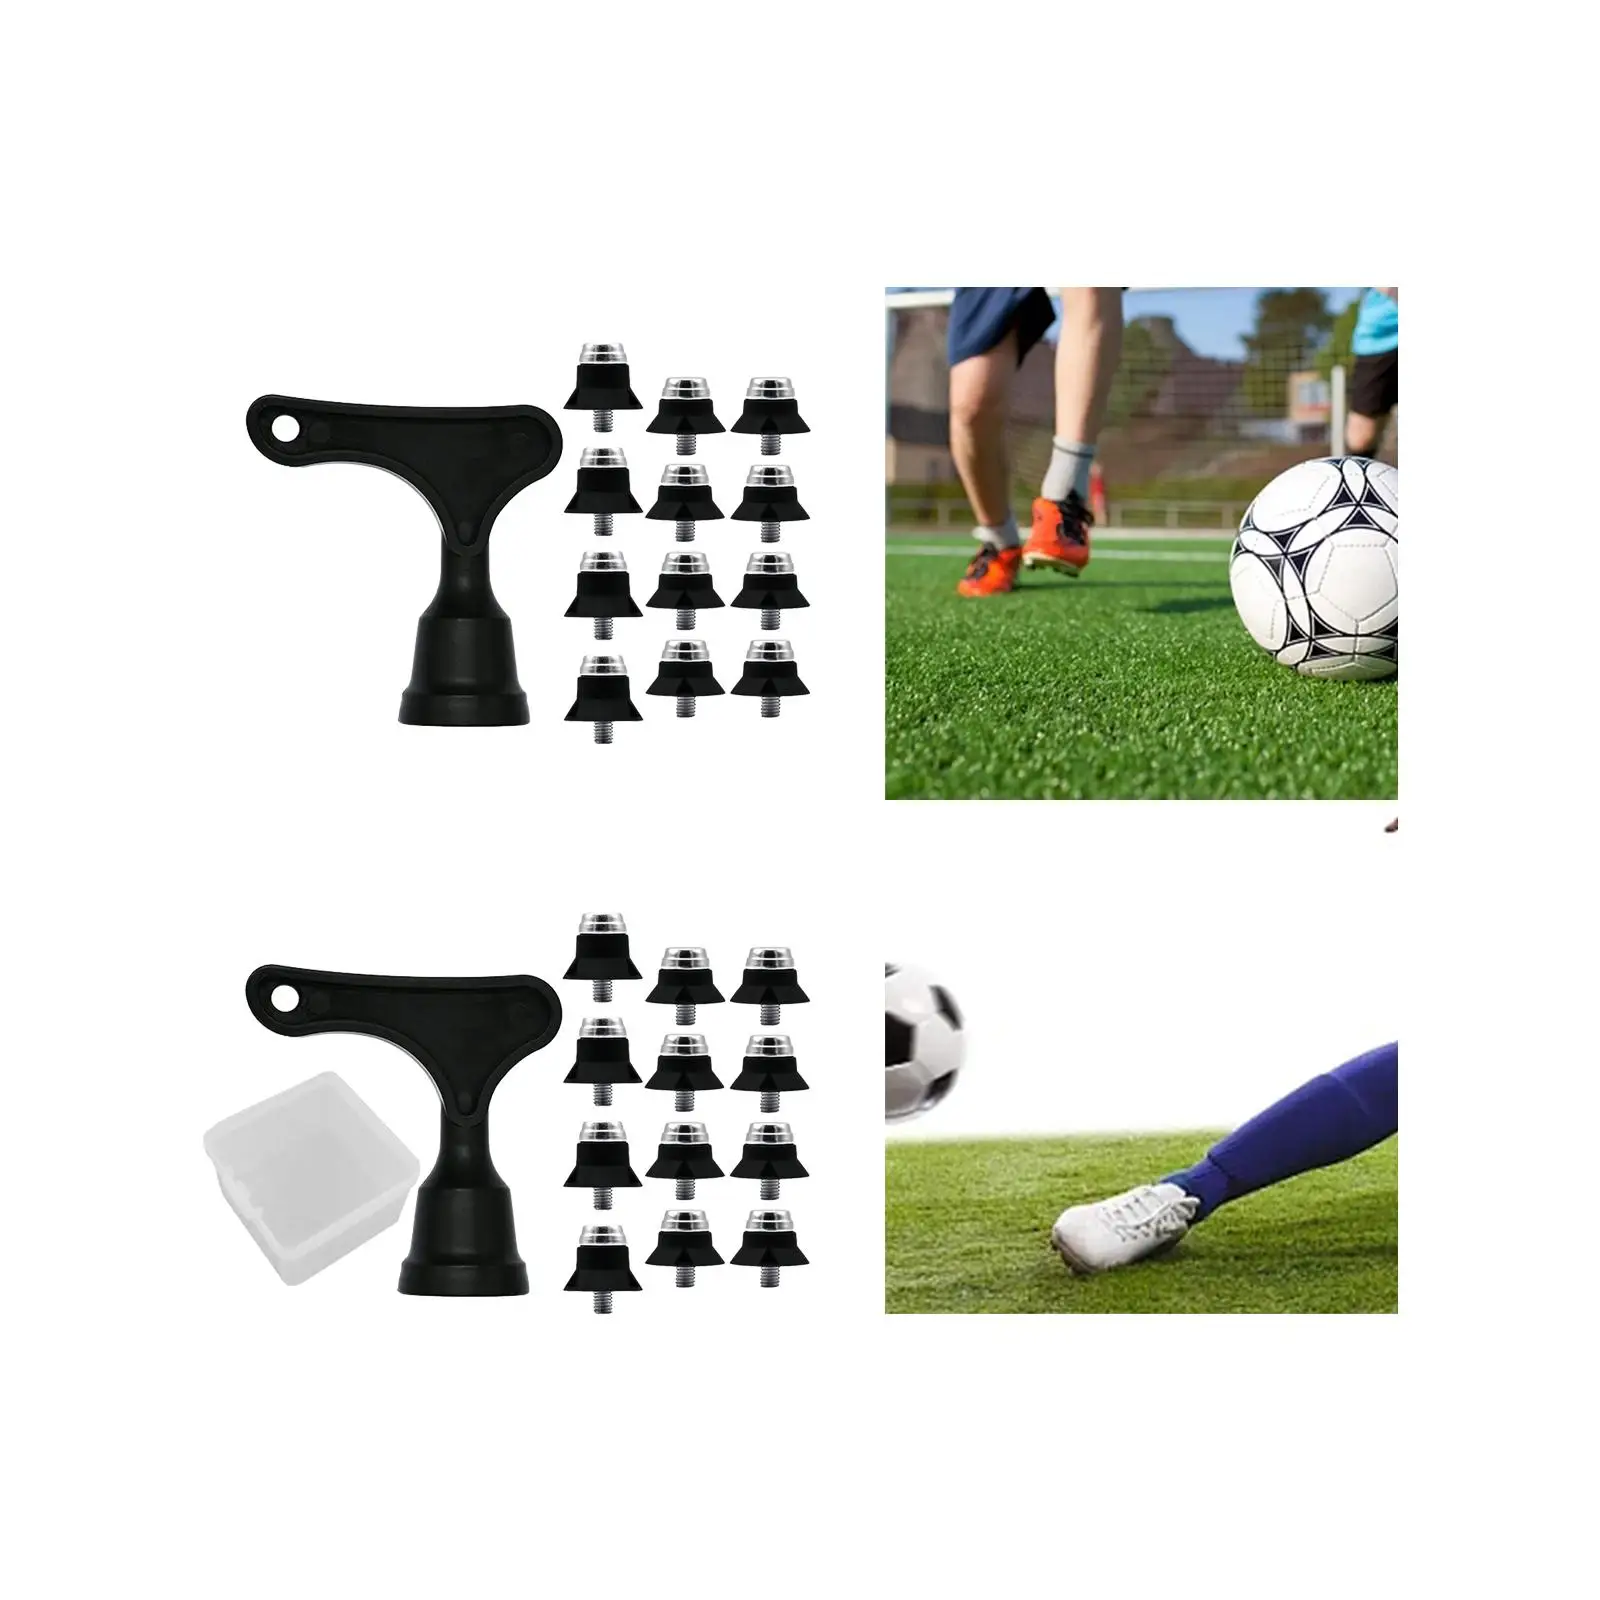 12x Replacement Football Studs Stable M5 Soccer Studs Football Boot Spikes for Training Indoor Outdoor Sports Athletic Sneakers